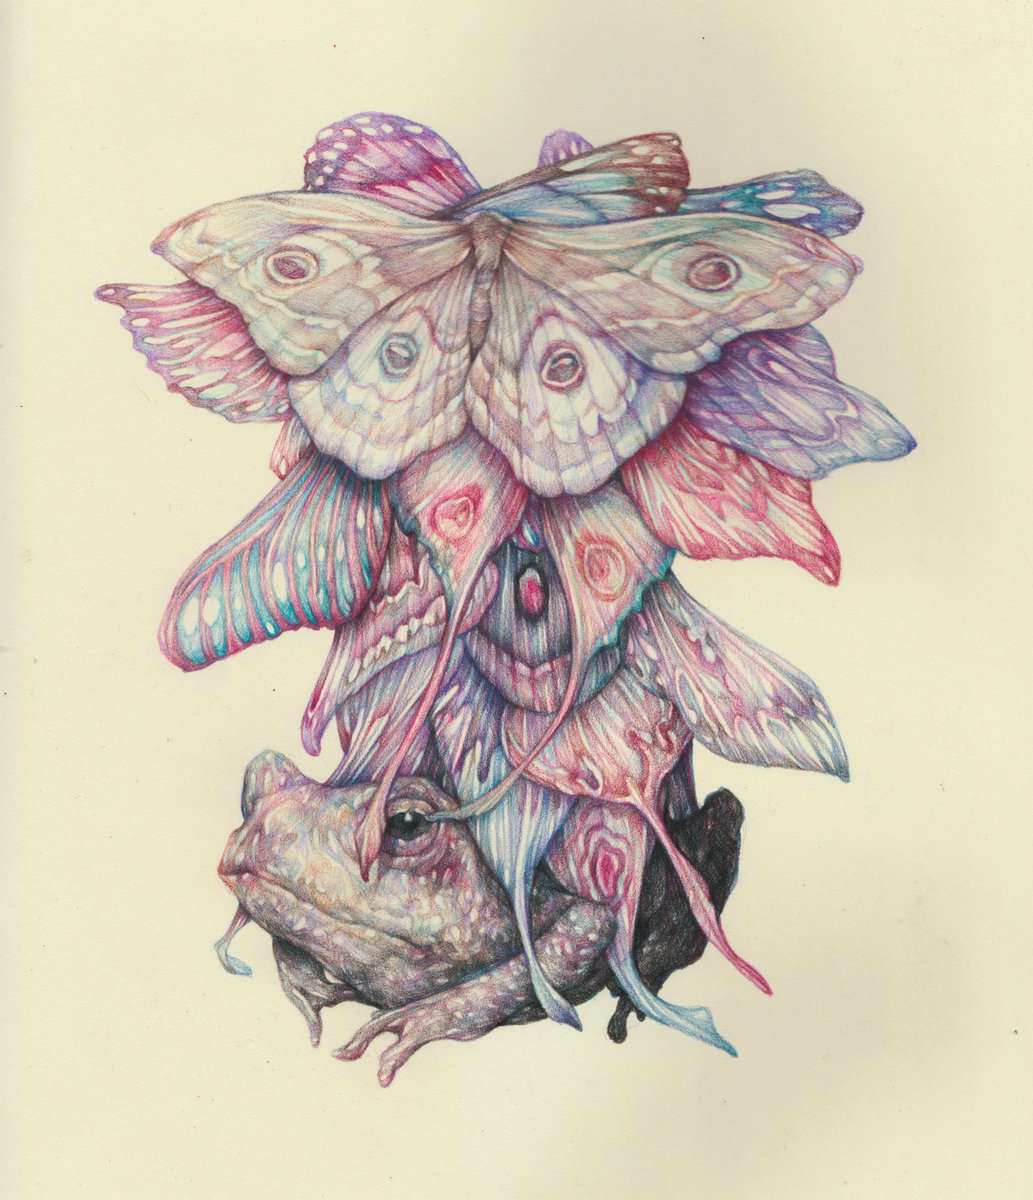 Surrealistic And Allegorical Fauna And Flora Colored Pencil Drawings By Marco Mazzoni 1